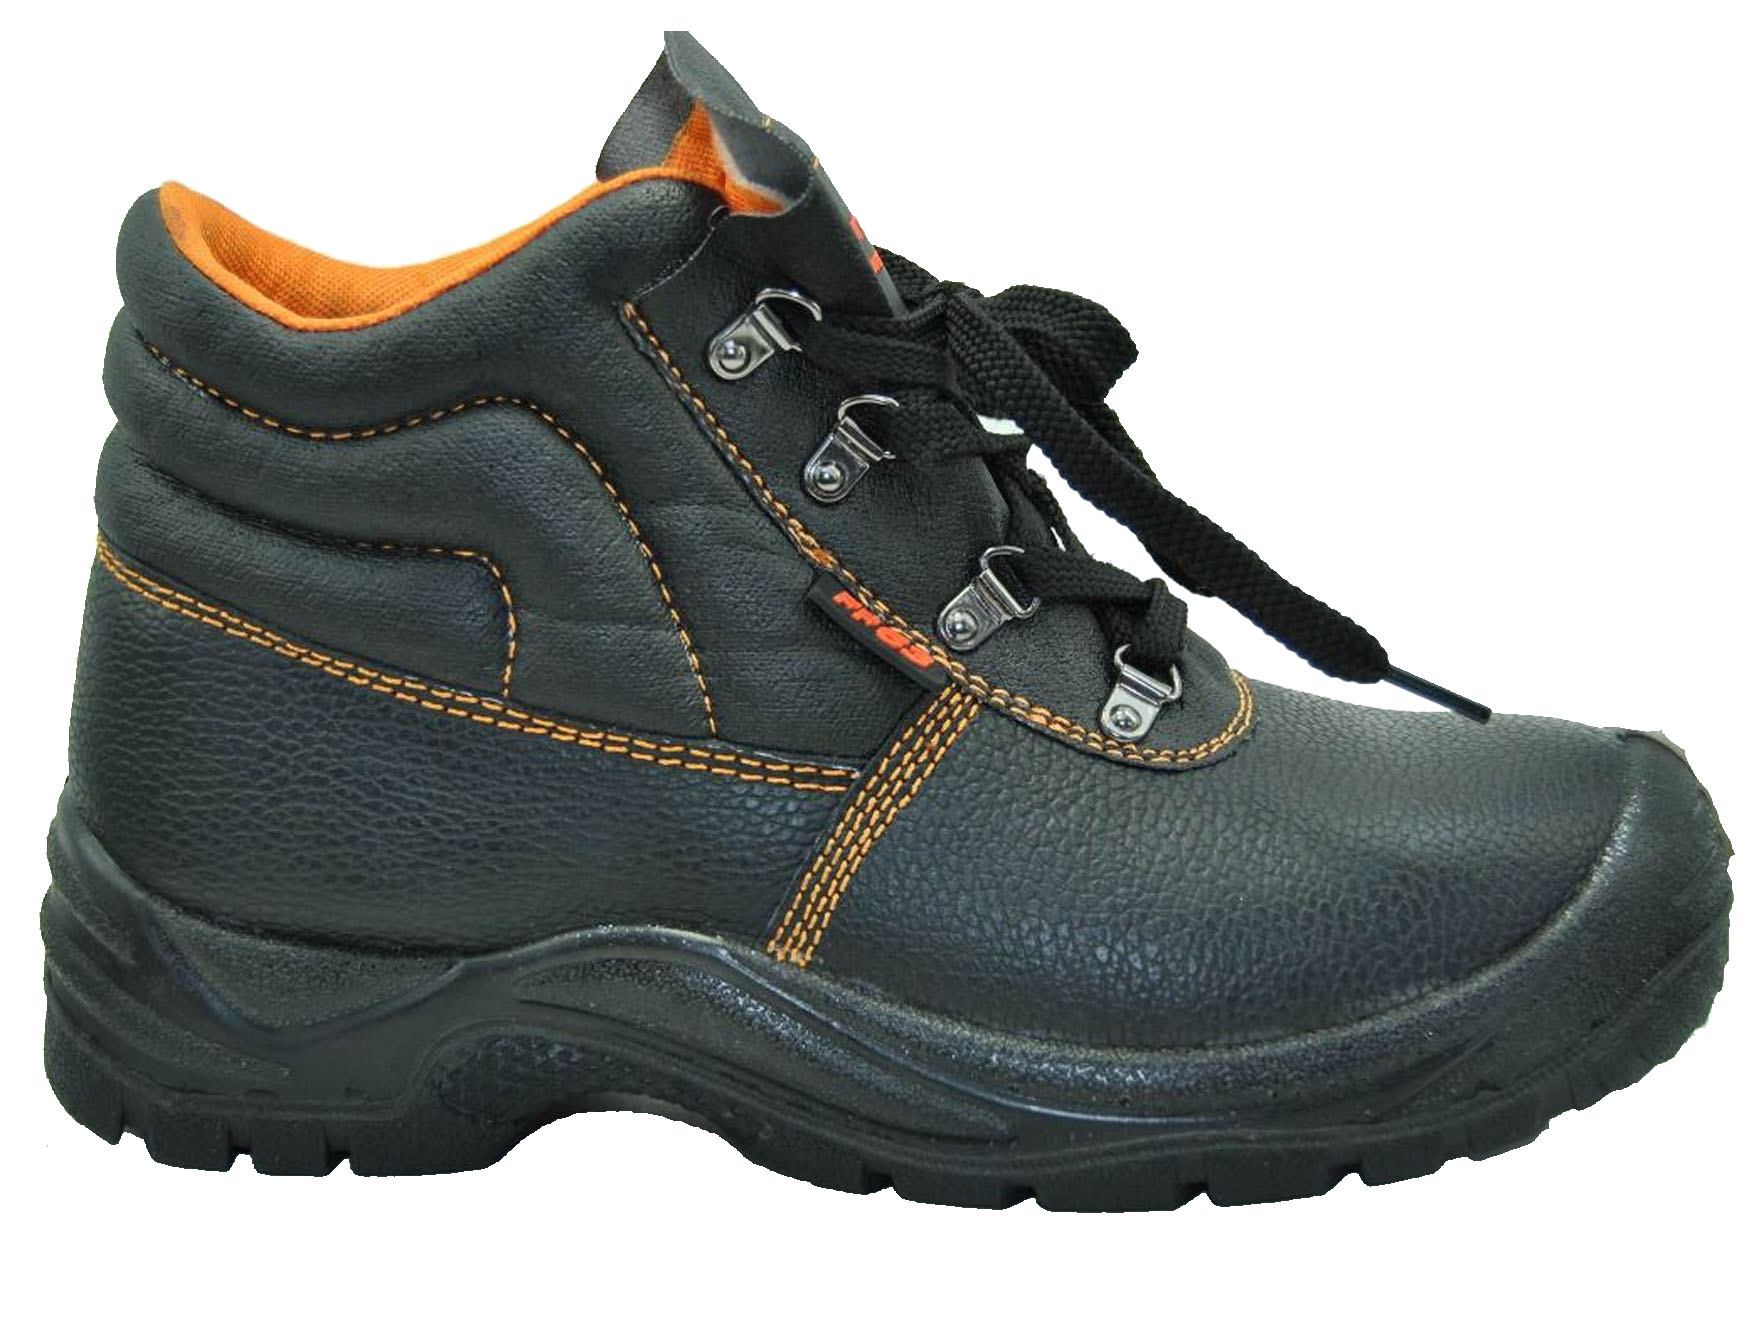 Wholesale safety boots - Safety shoes suppliers South africa | Safety Footwear - Bova Boots ...